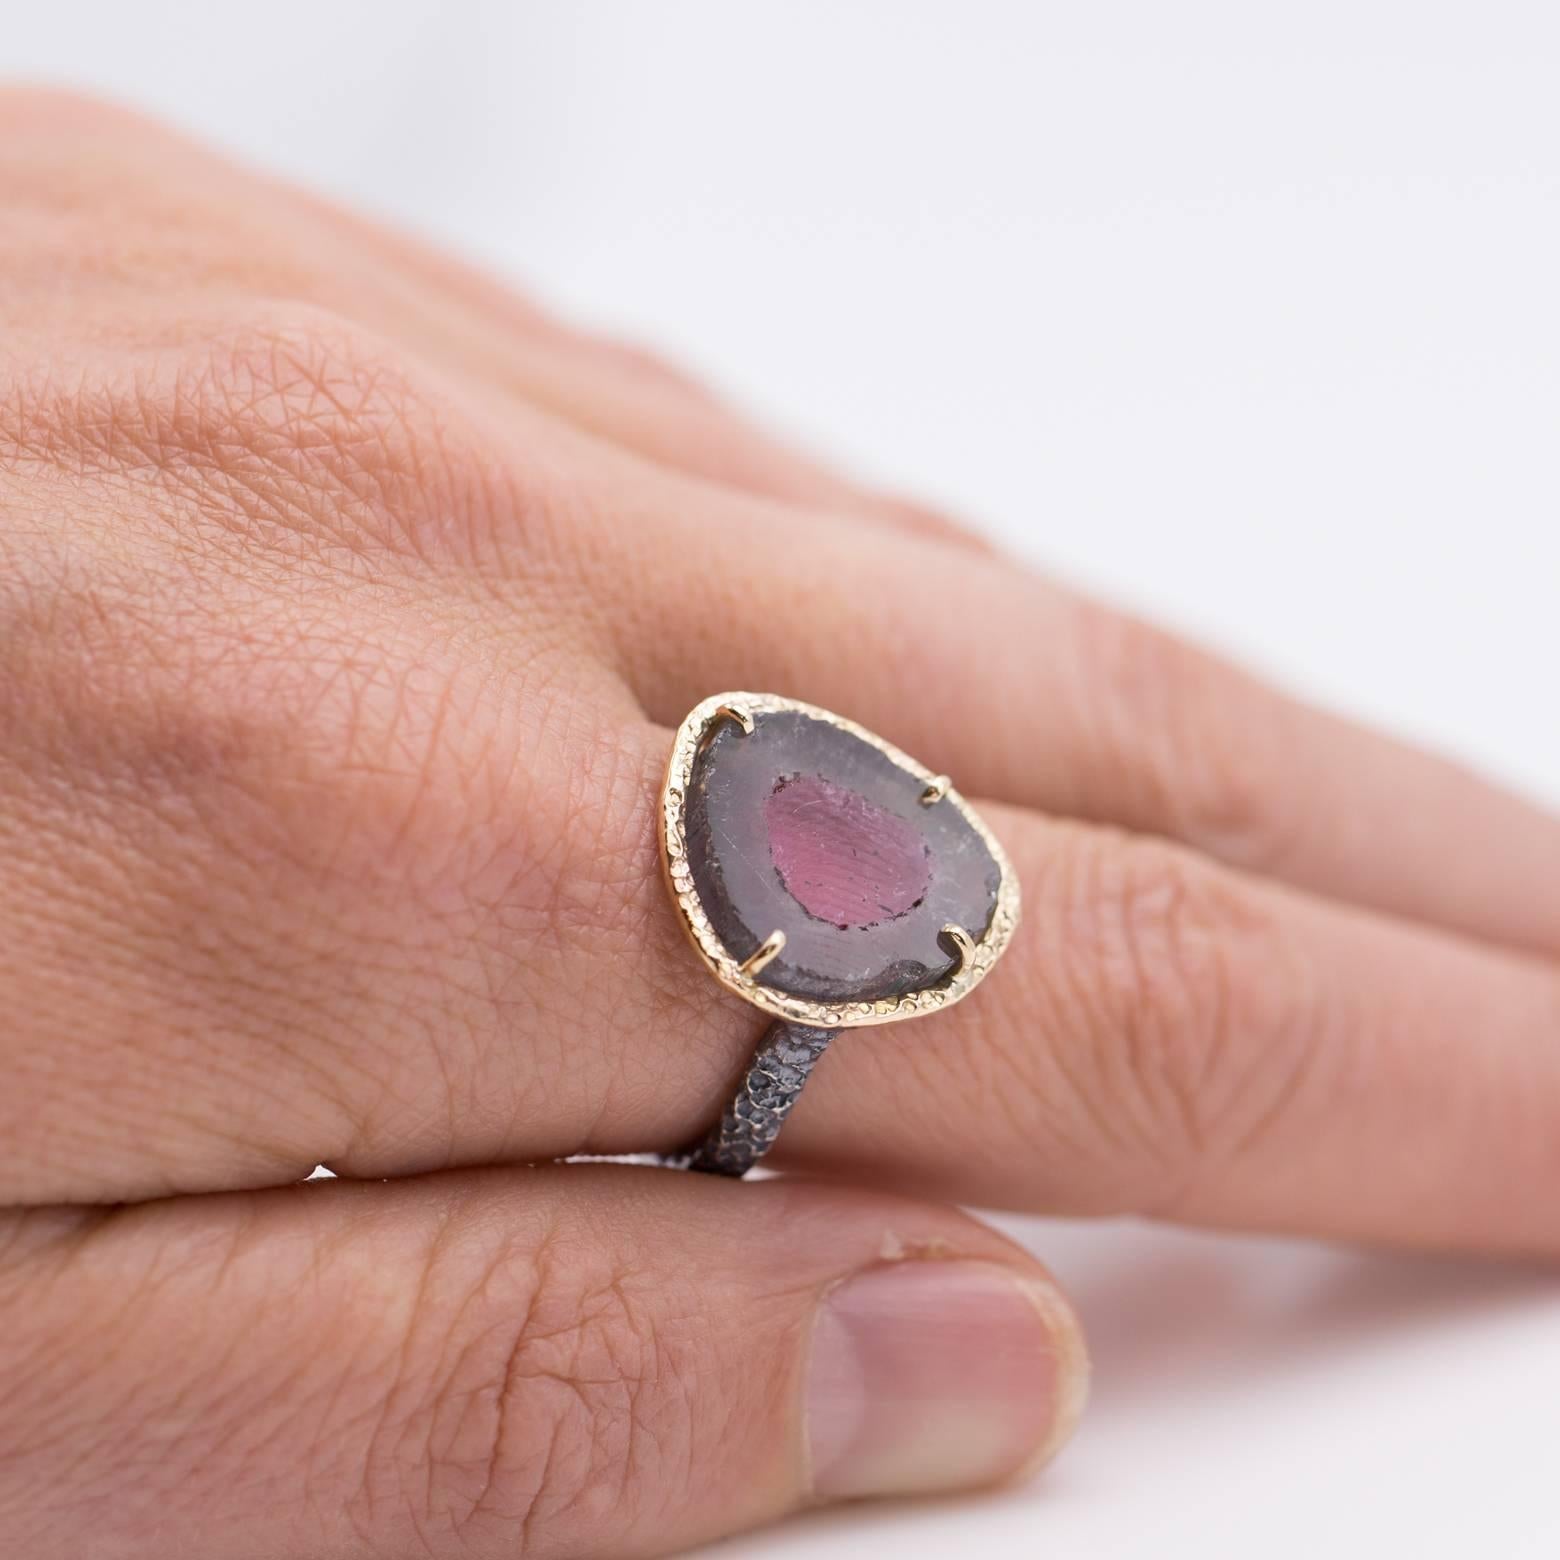 This one of a kind triangle watermelon tourmaline slice ring is set in 14K yellow gold and oxidized sterling silver giving it that beautiful two-toned look that goes great with just about everything! Handmade in the San Francisco Bay Area this